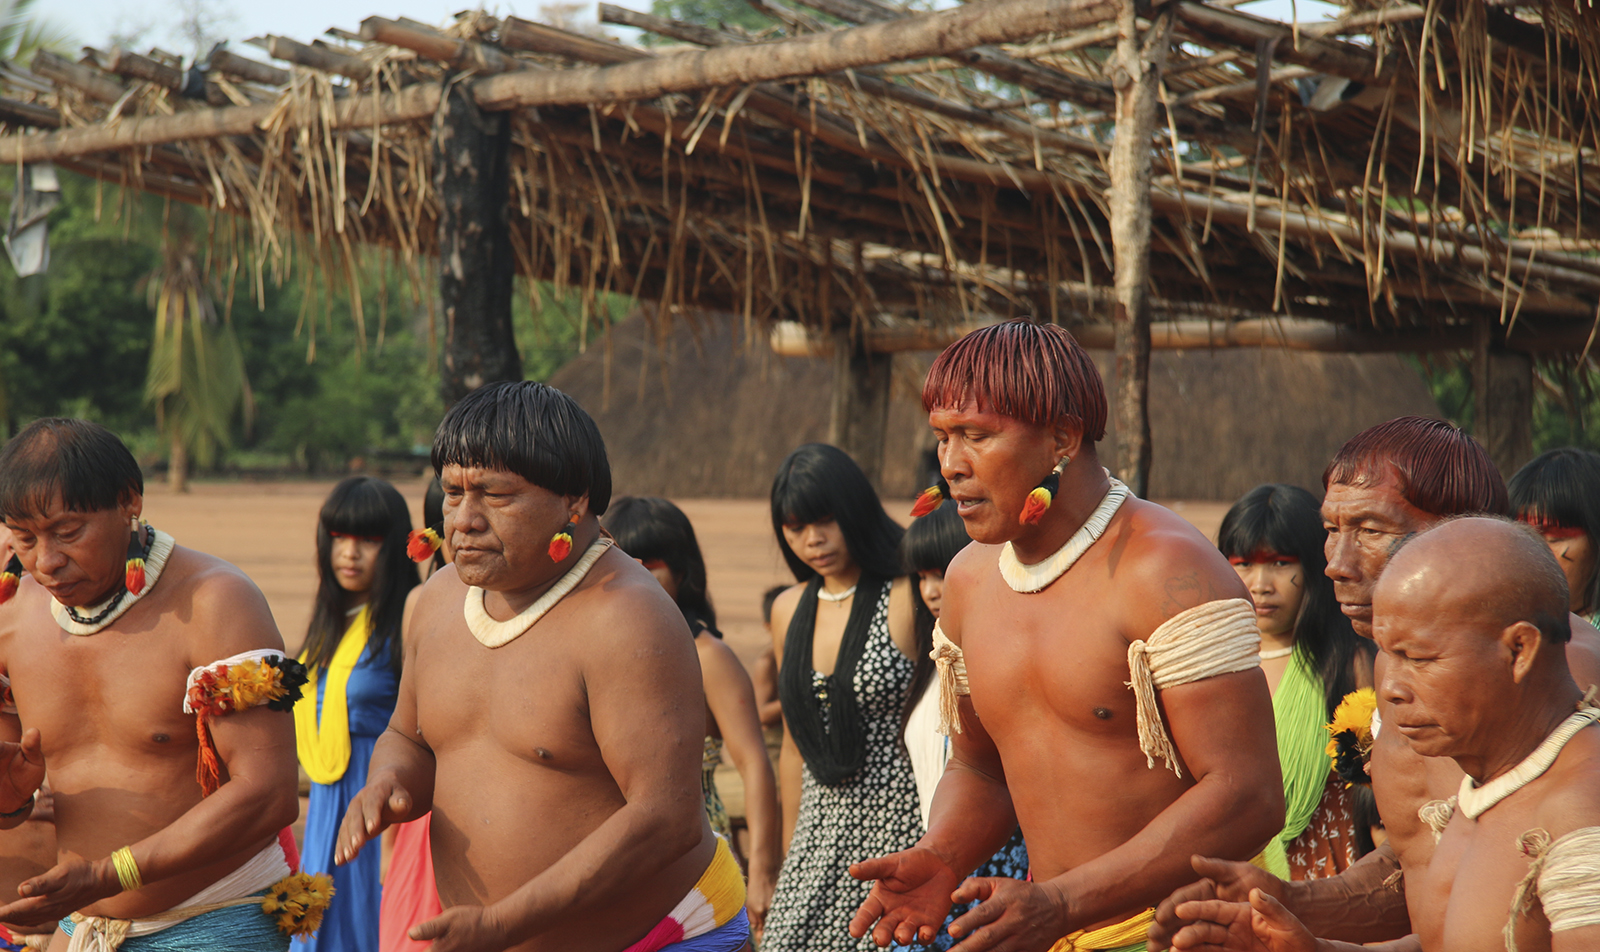 A group of indigenous people perform a traditional dance.